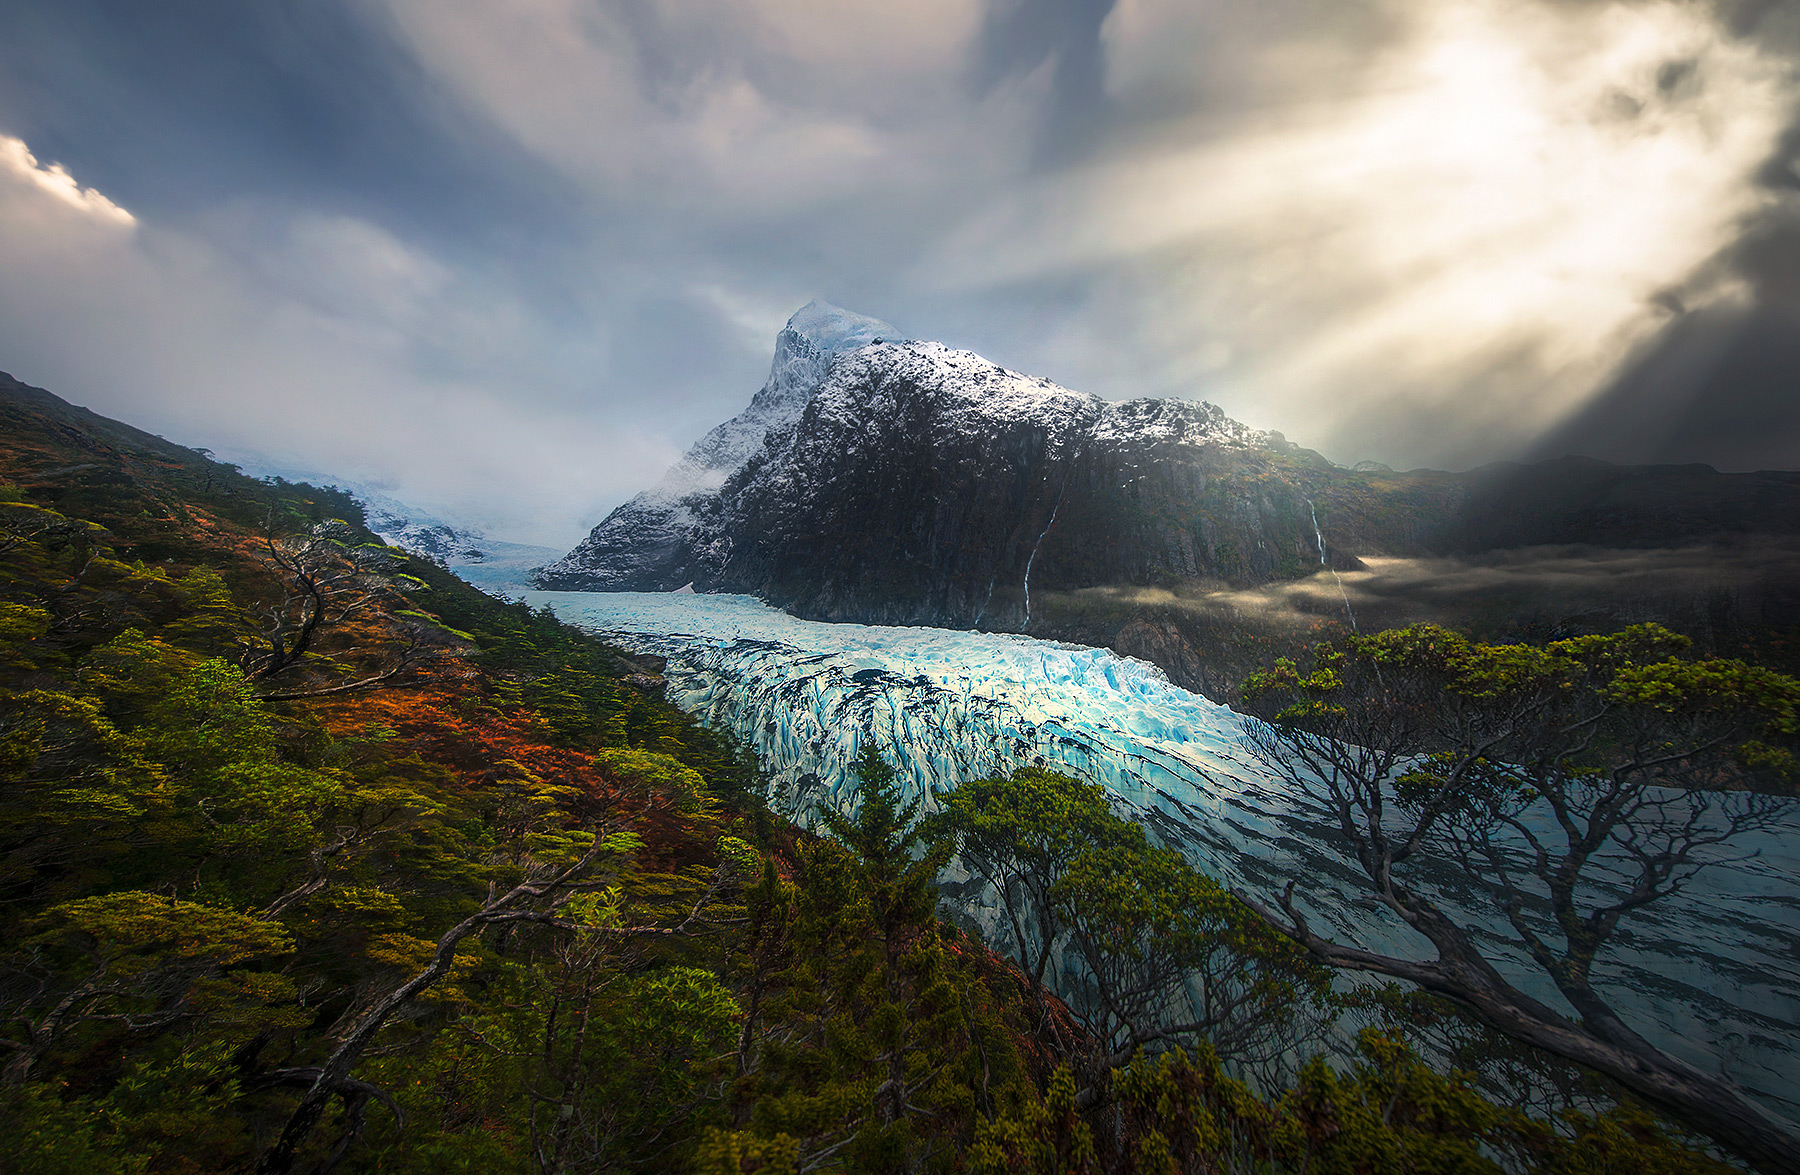 Some epic lighting beams into a scene depicting one of the most remote rainforests in the world, sitting above massive glaciers...